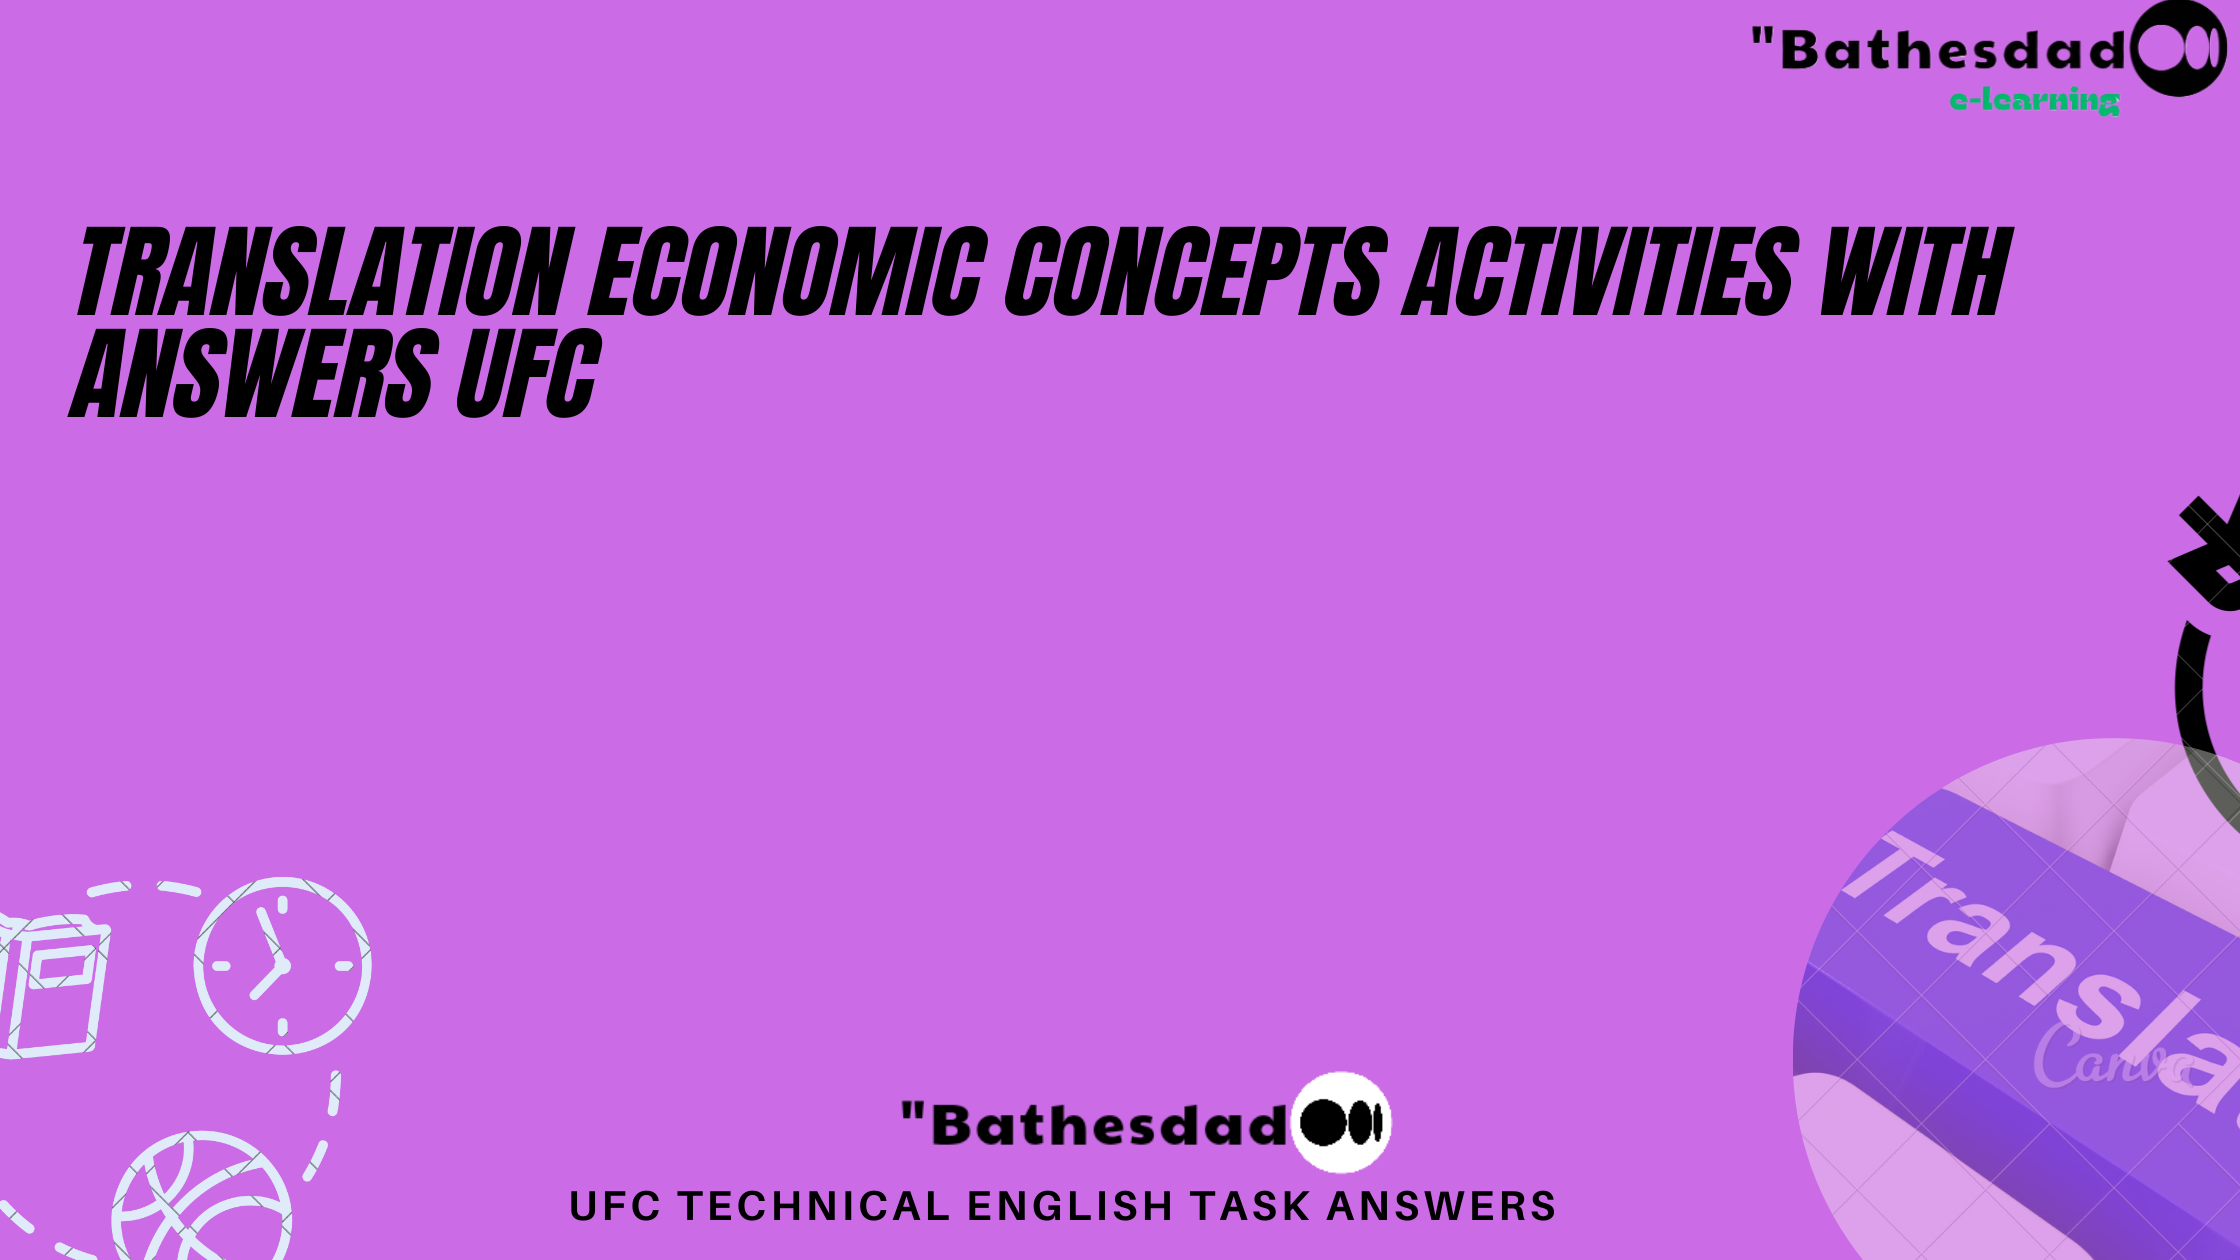 Translation economic concepts activities with answers UFC